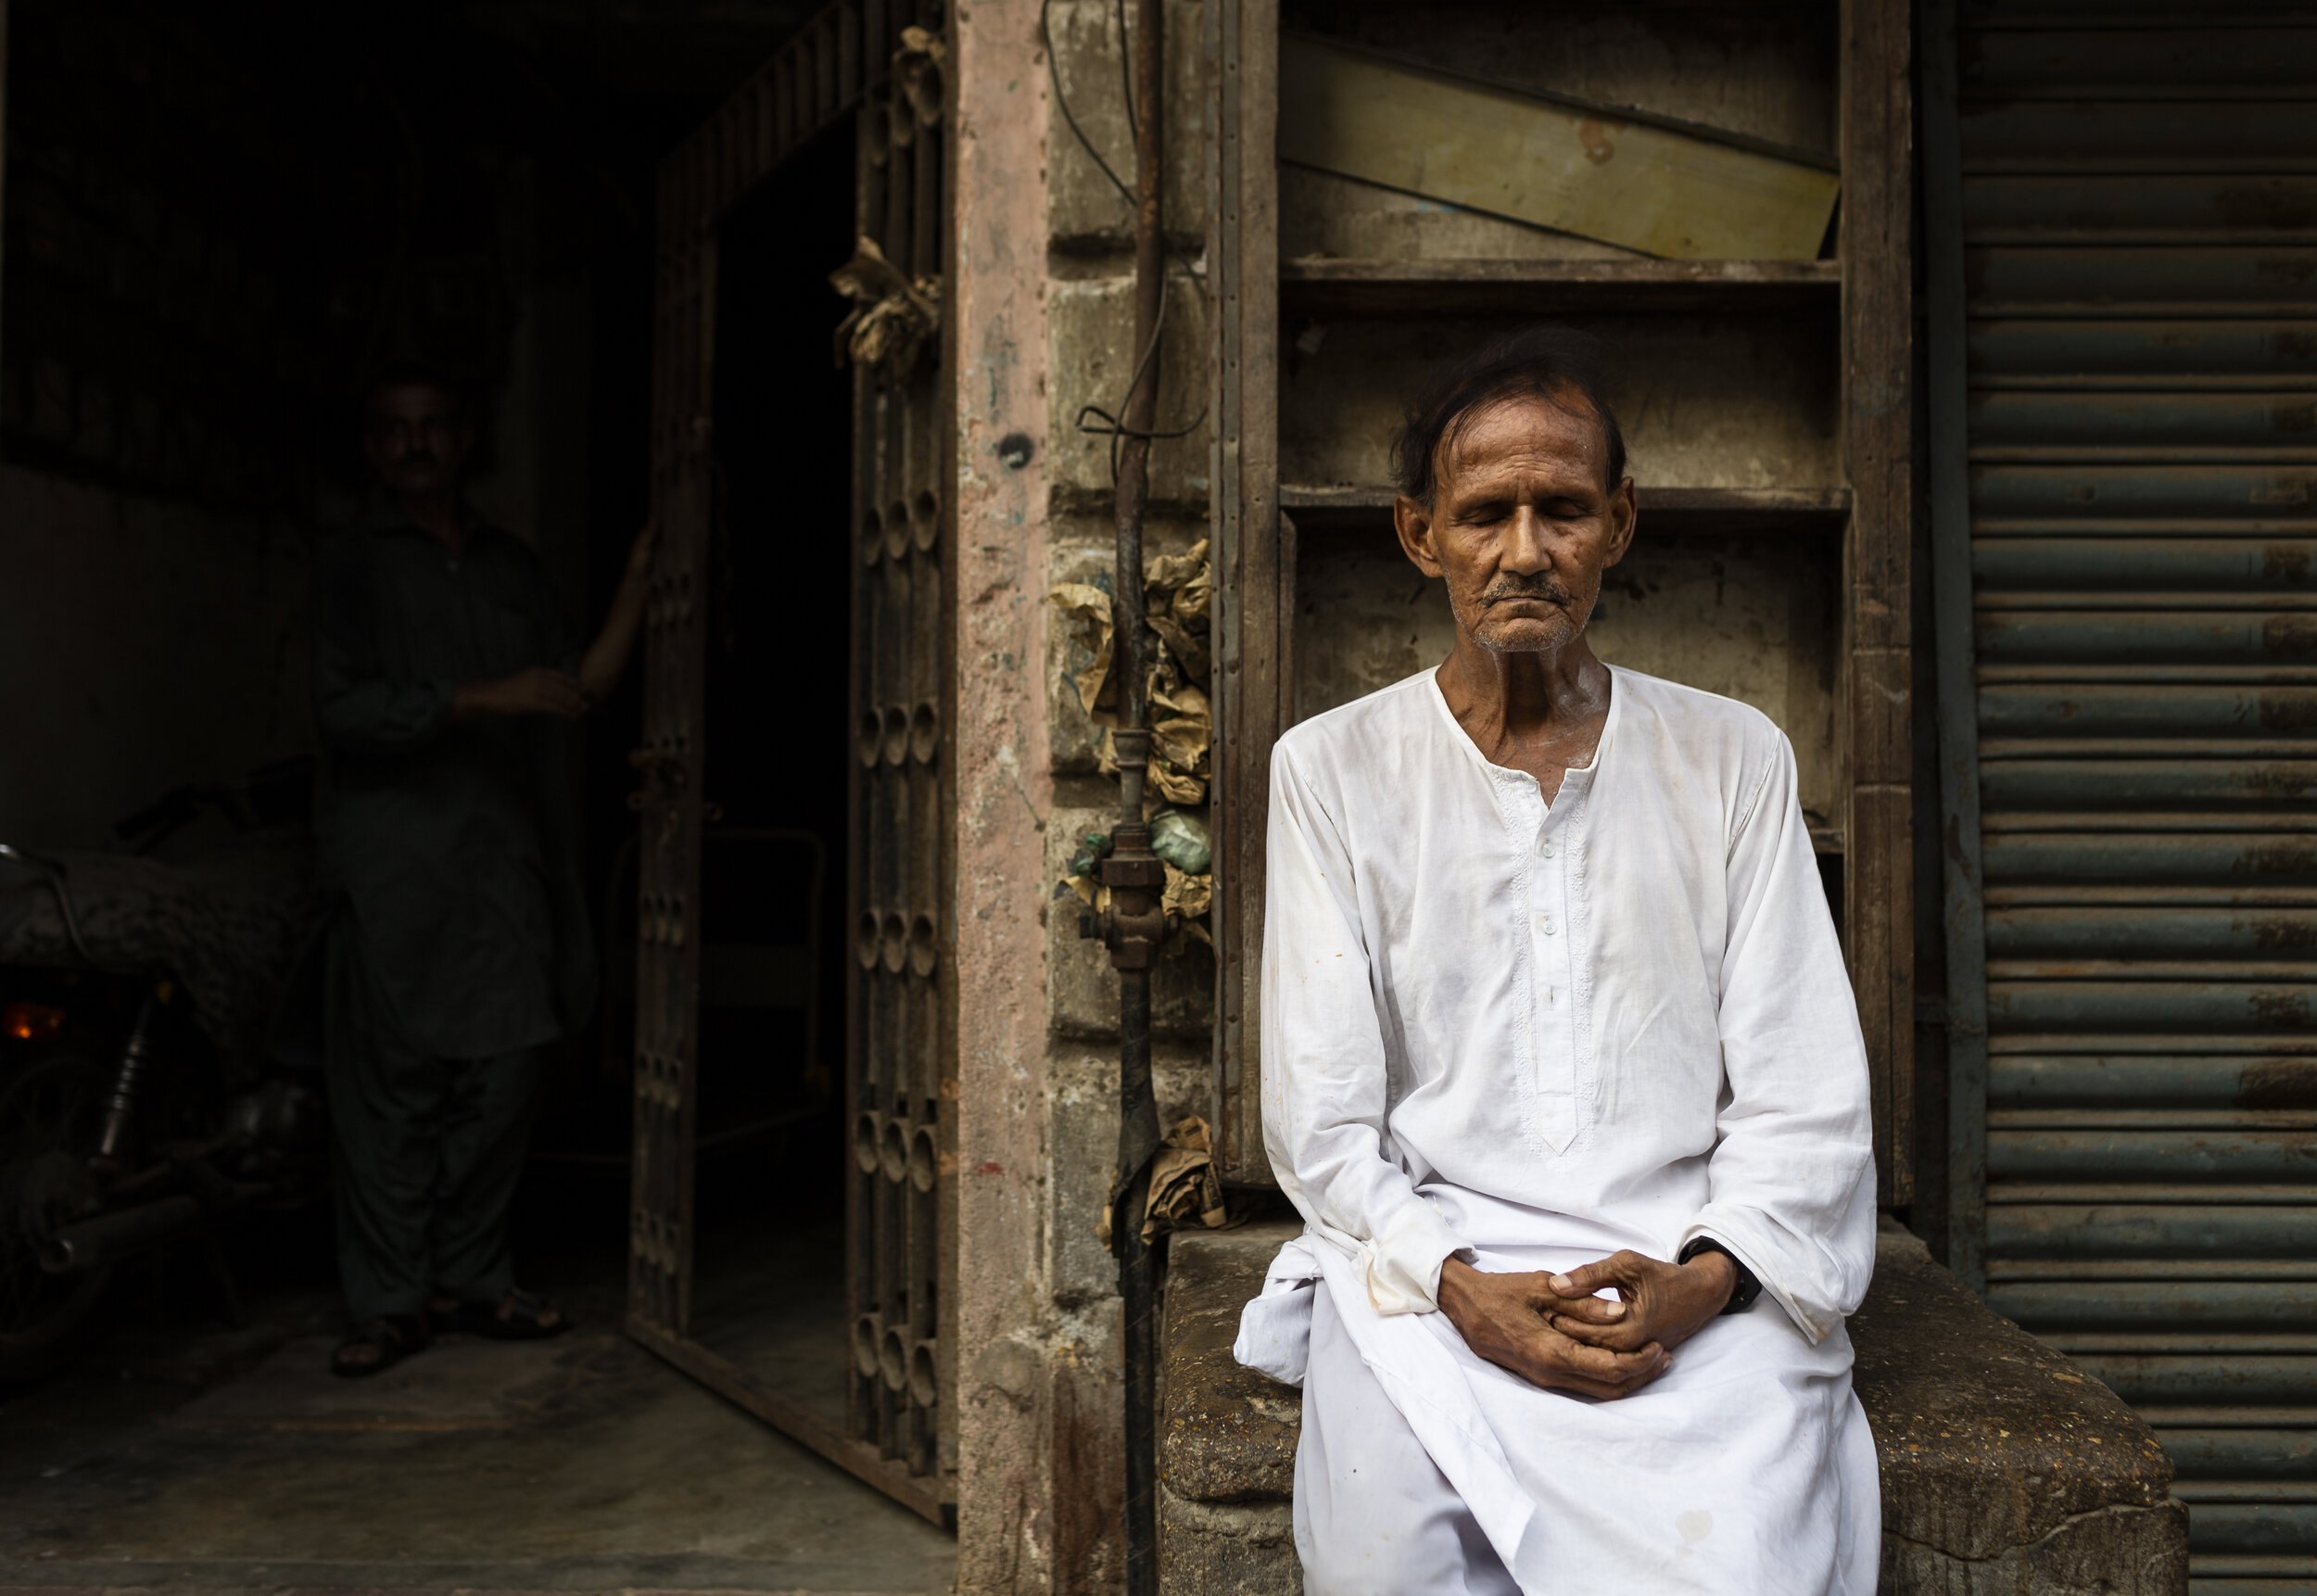  Portrait: Muhammad Jameel, 60, sits outside his apartment in Karachi, Pakistan on June 2, 2019. Jameel has been a long time resident of the 'Burns Rd' area and attests that 'people from all over come to enjoy the variety of delicious foods.'Built by